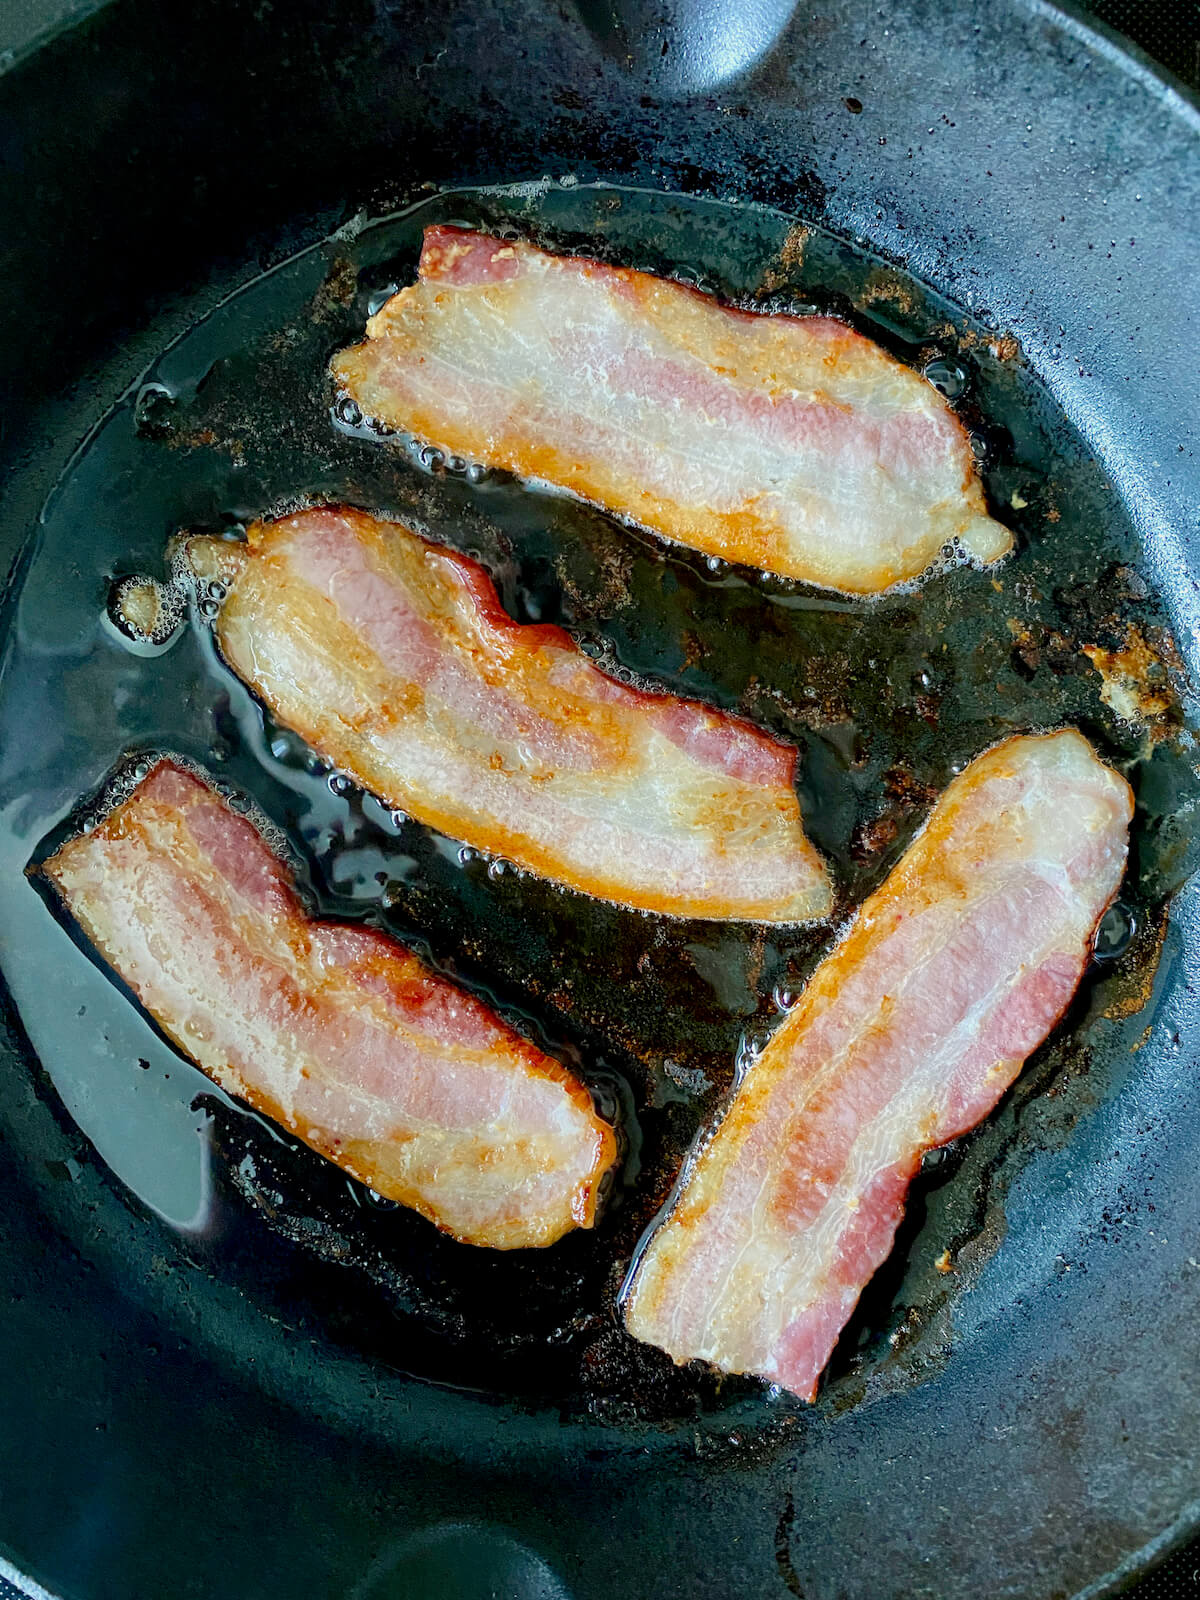 Bacon cooking in a cast iron skillet.